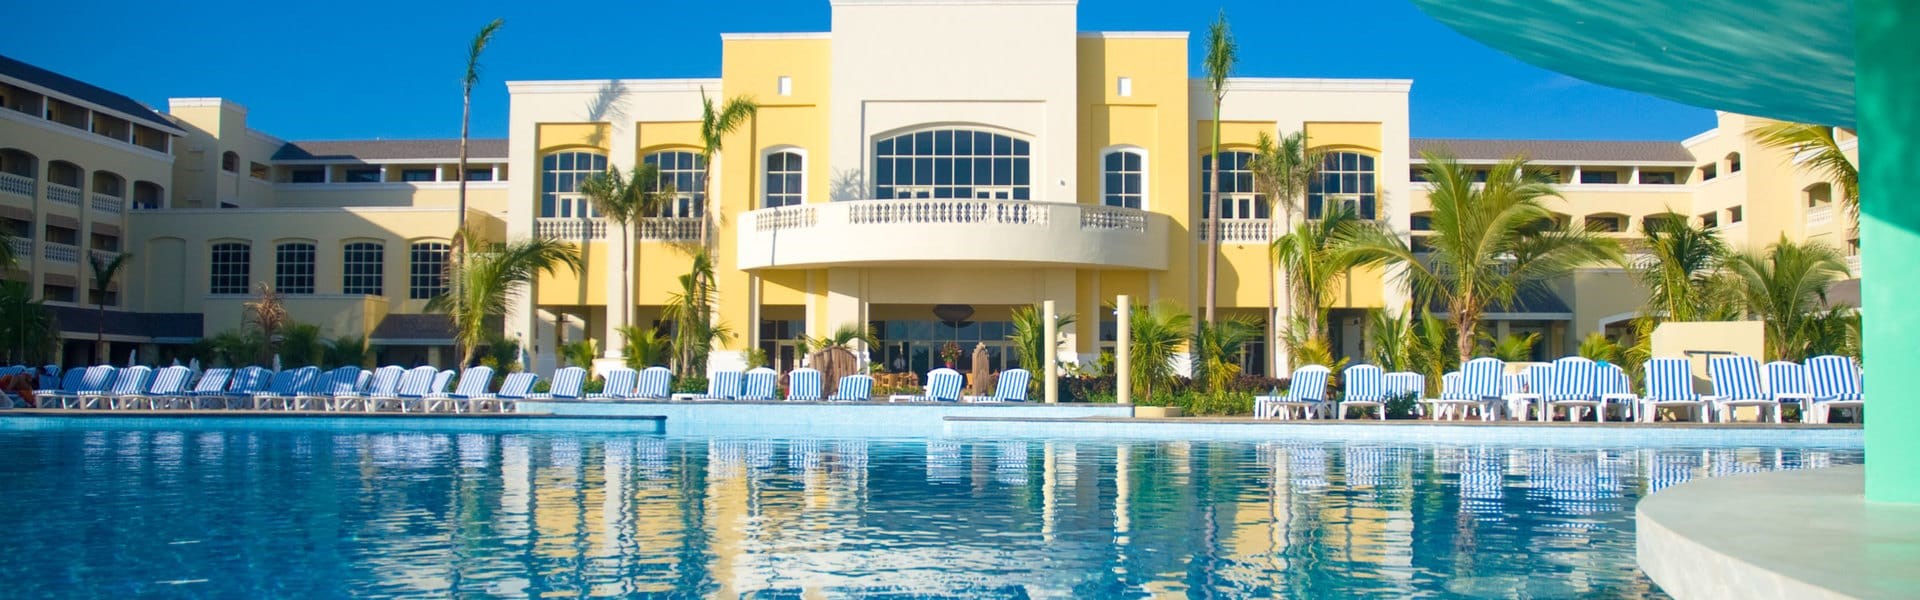 Iberostar Rose Hall Beach Hotel Wedding Venue And Packages